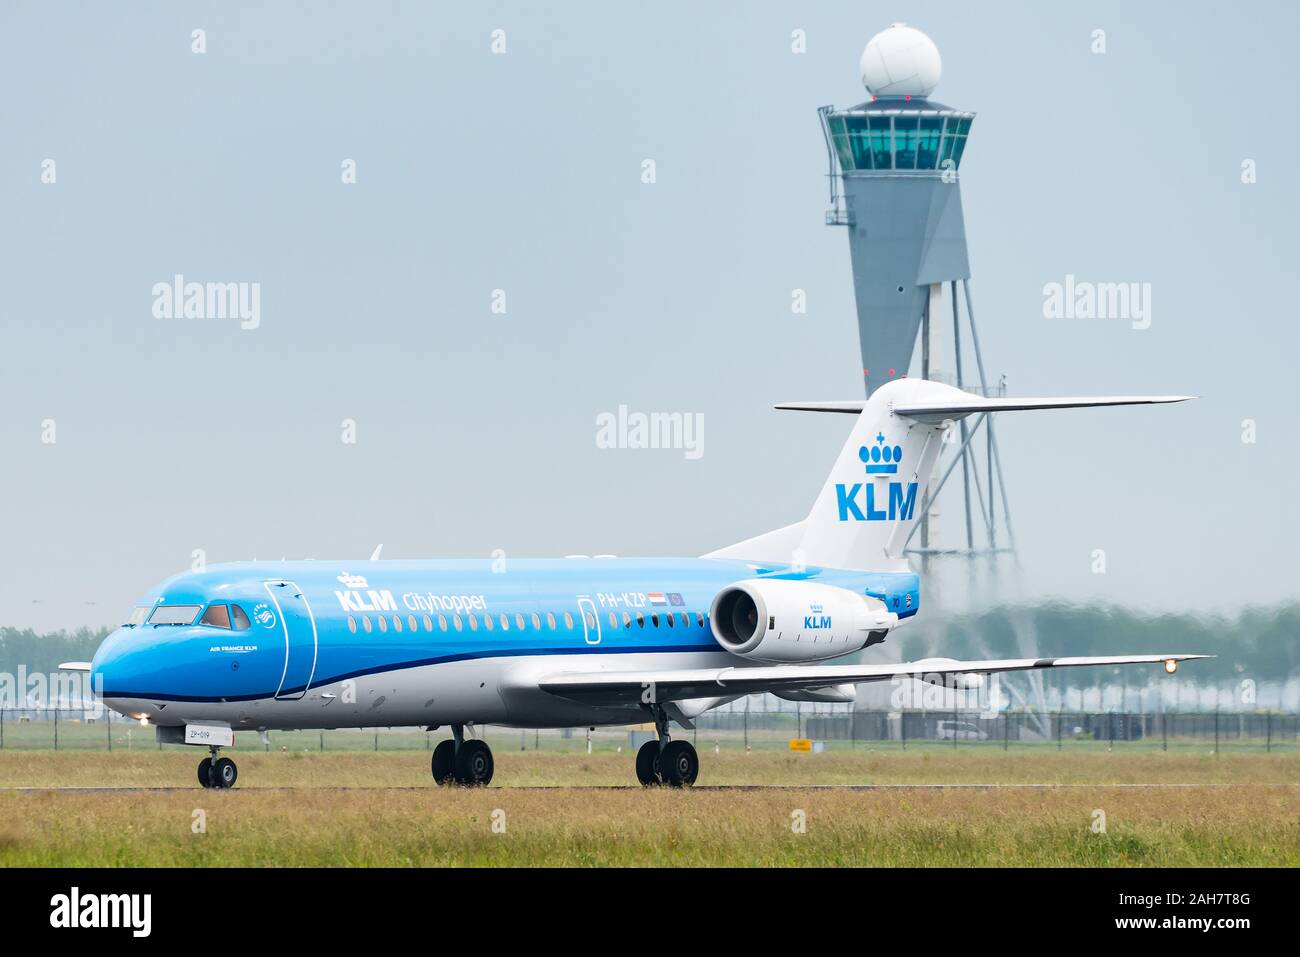 A Fokker 70 passenger aircraft of KLM Cityhopper at the Amsterdam Airport Schiphol. Stock Photo